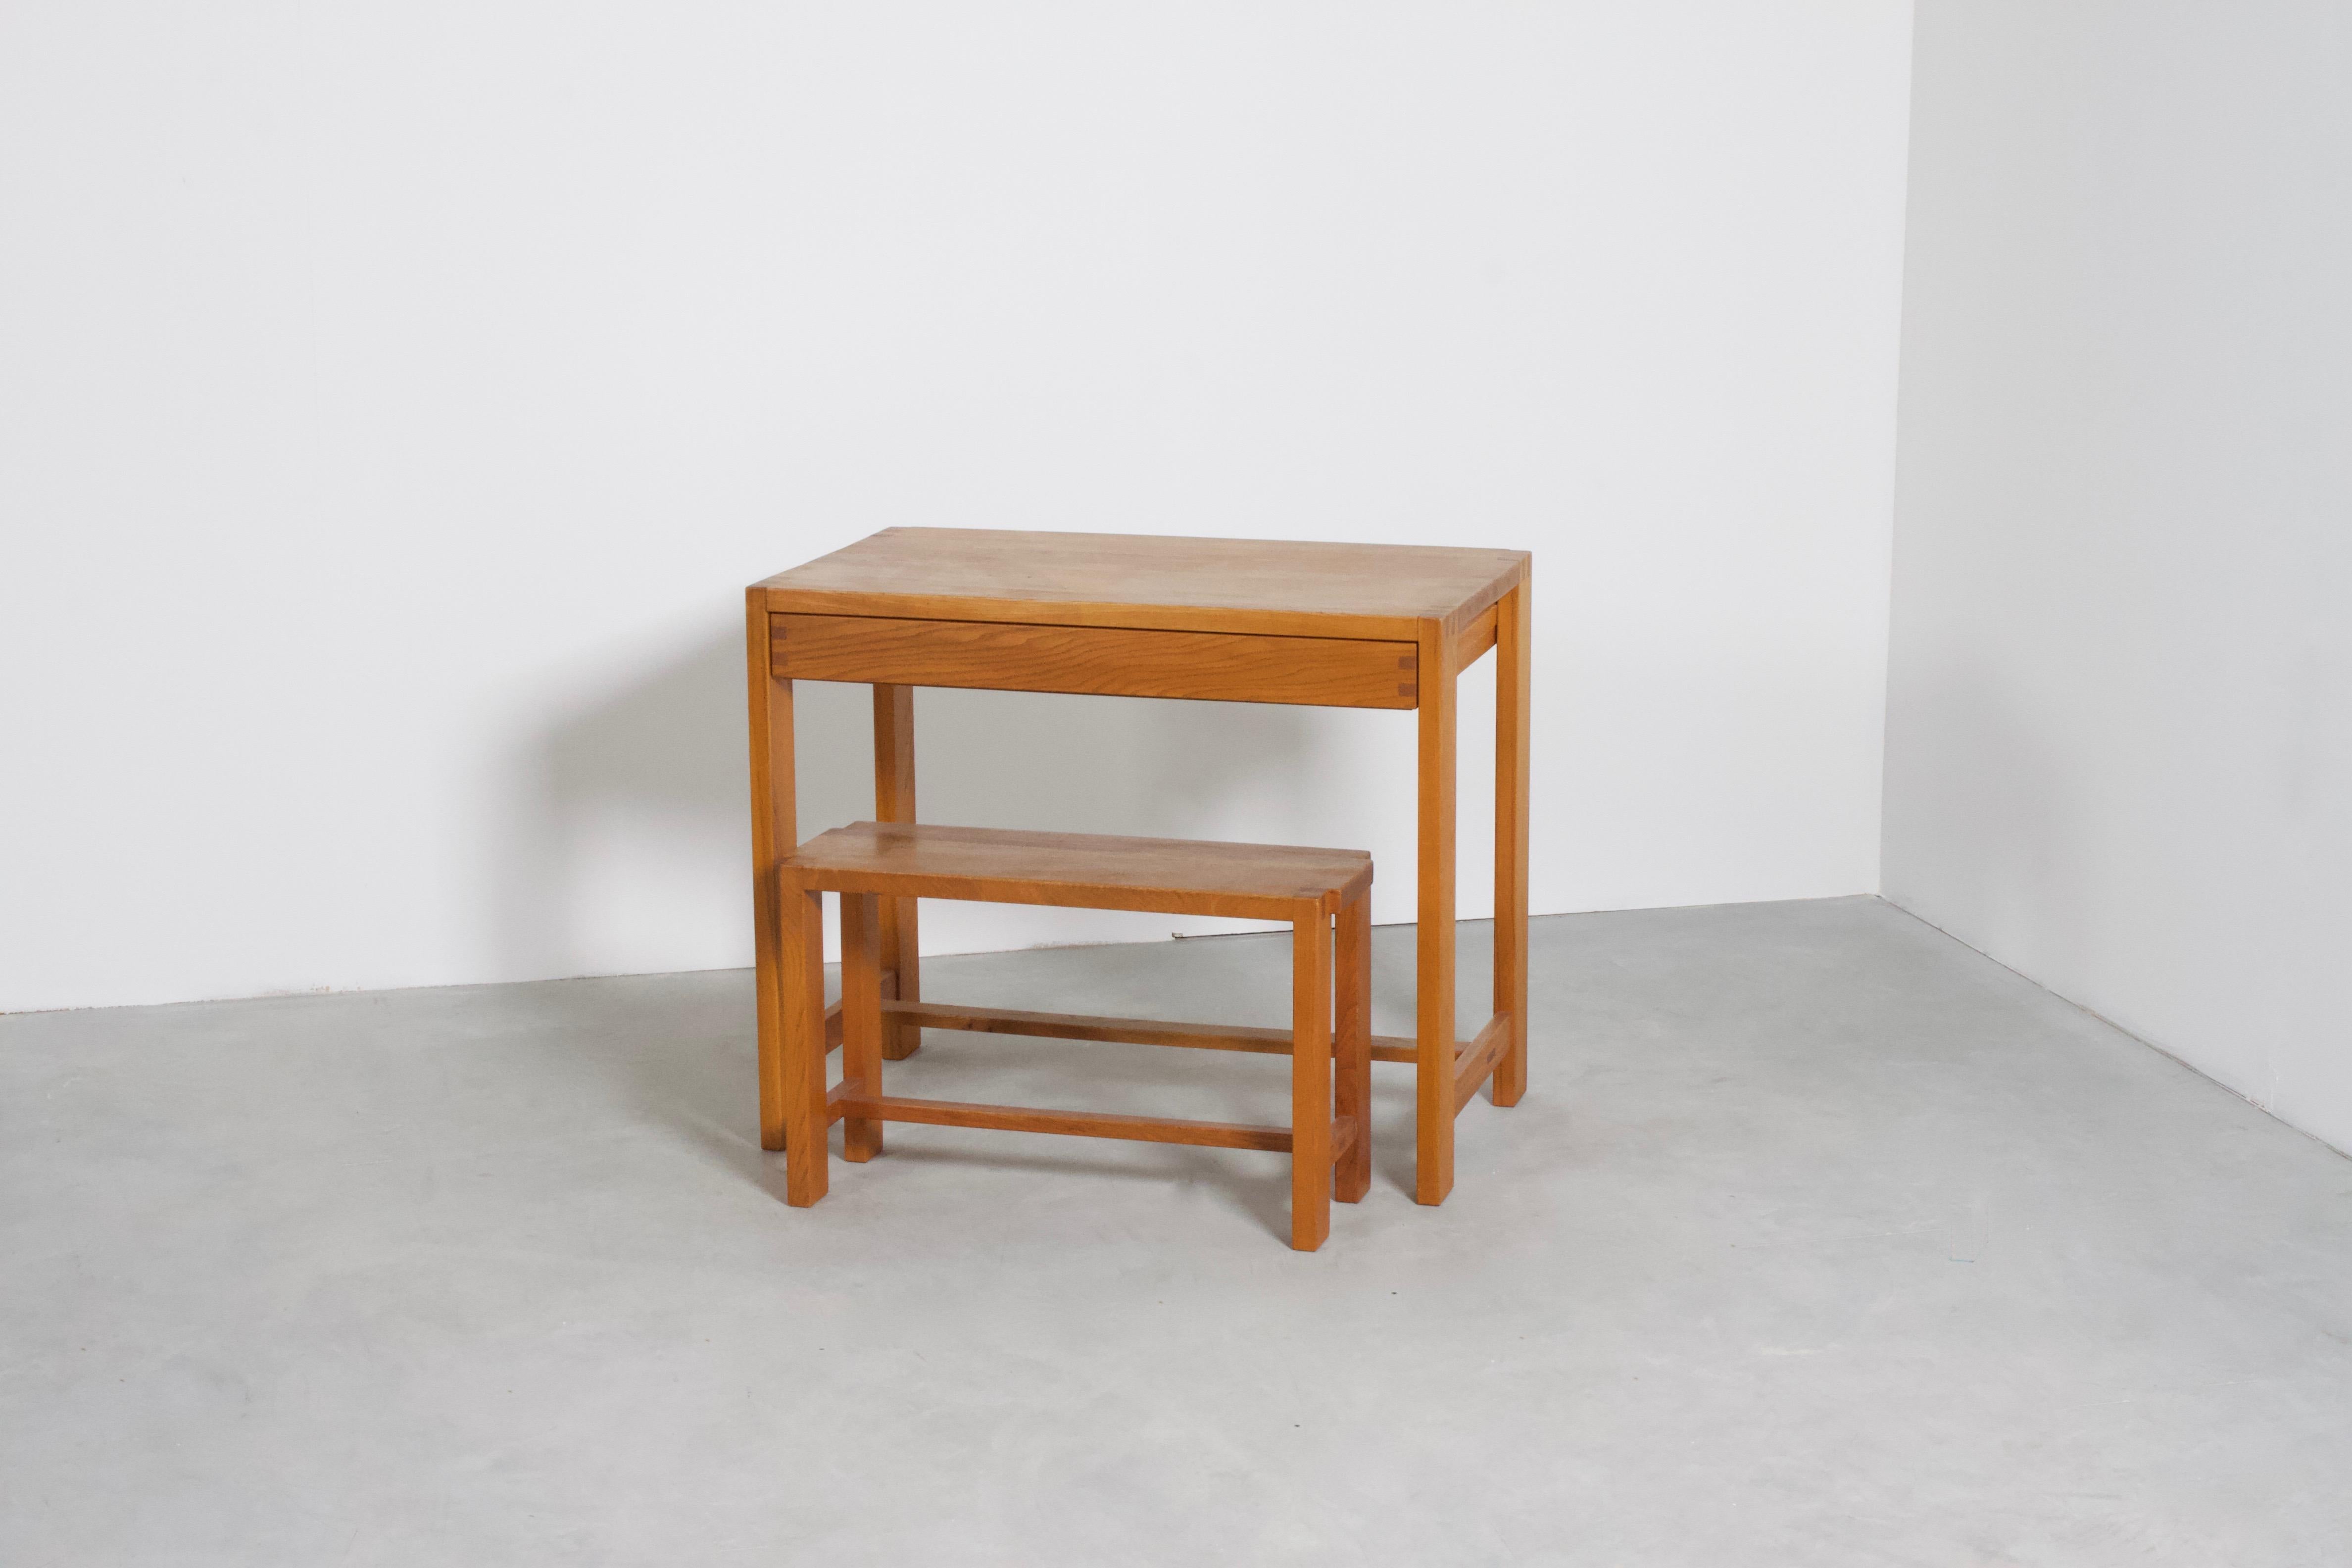 Desk B03 and matching stool S09 by Pierre Chapo in very good condition.

The desk and stool are of a minimalist design and are made of solid elm. 

The desk is equipped with a large drawer.

The joints on the corners and drawer form both essential